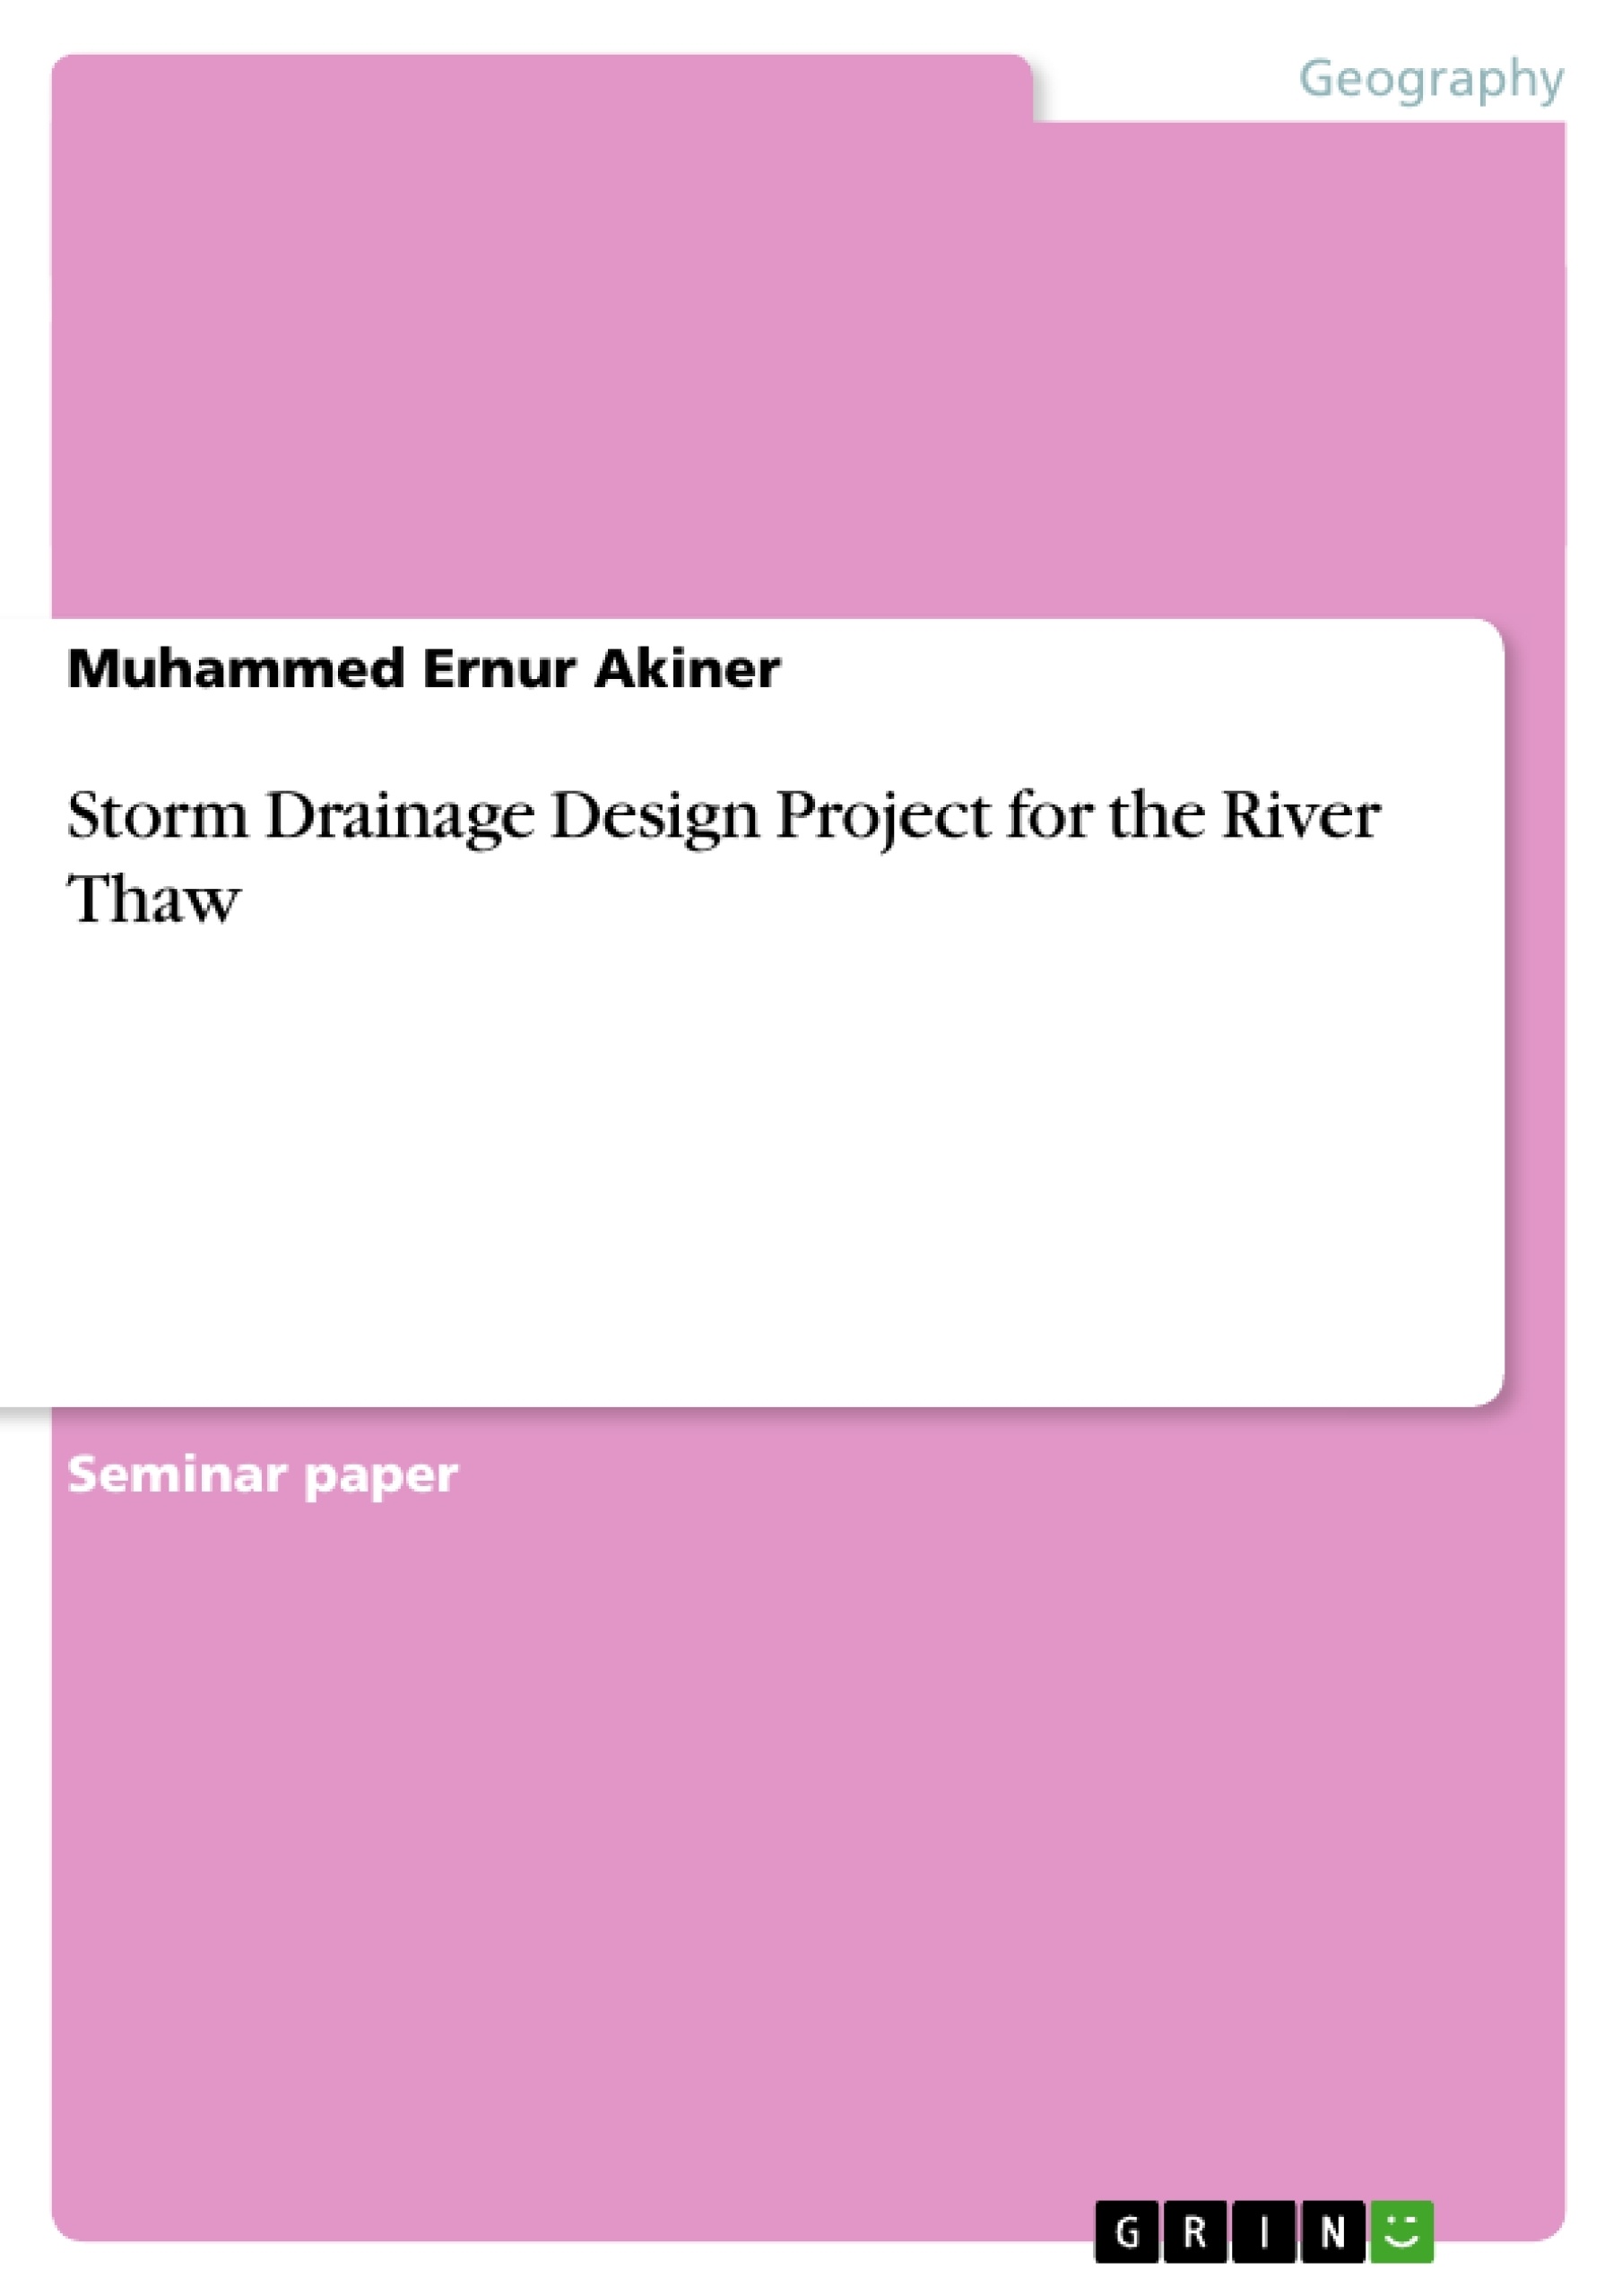 Title: Storm Drainage Design Project for the River Thaw